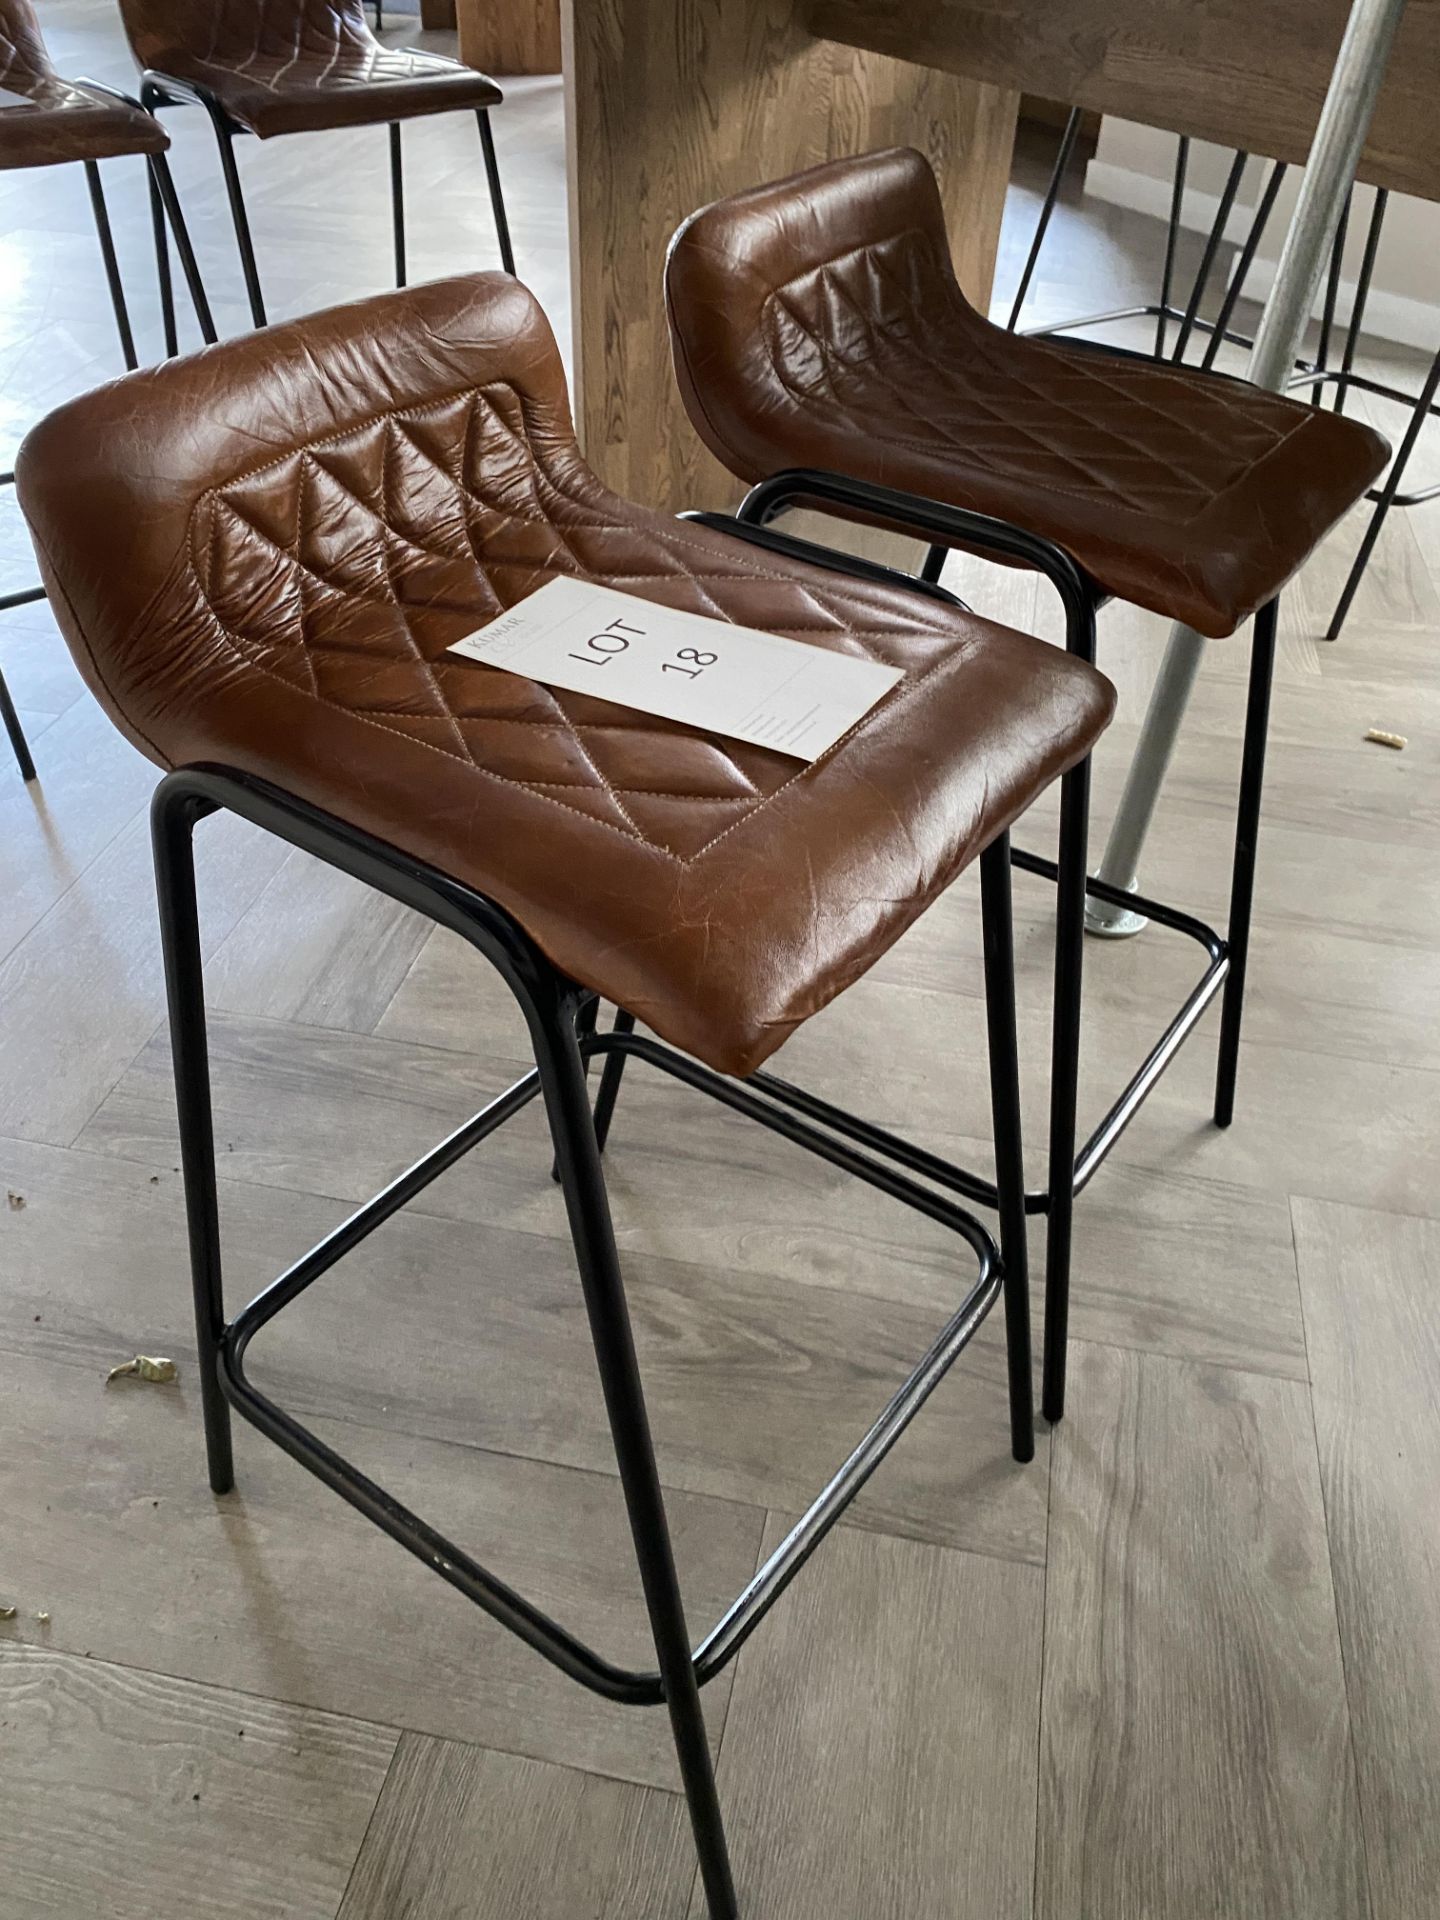 2x Leather Upholstered Bar Stools - New Cost £120 per stool - Image 4 of 4